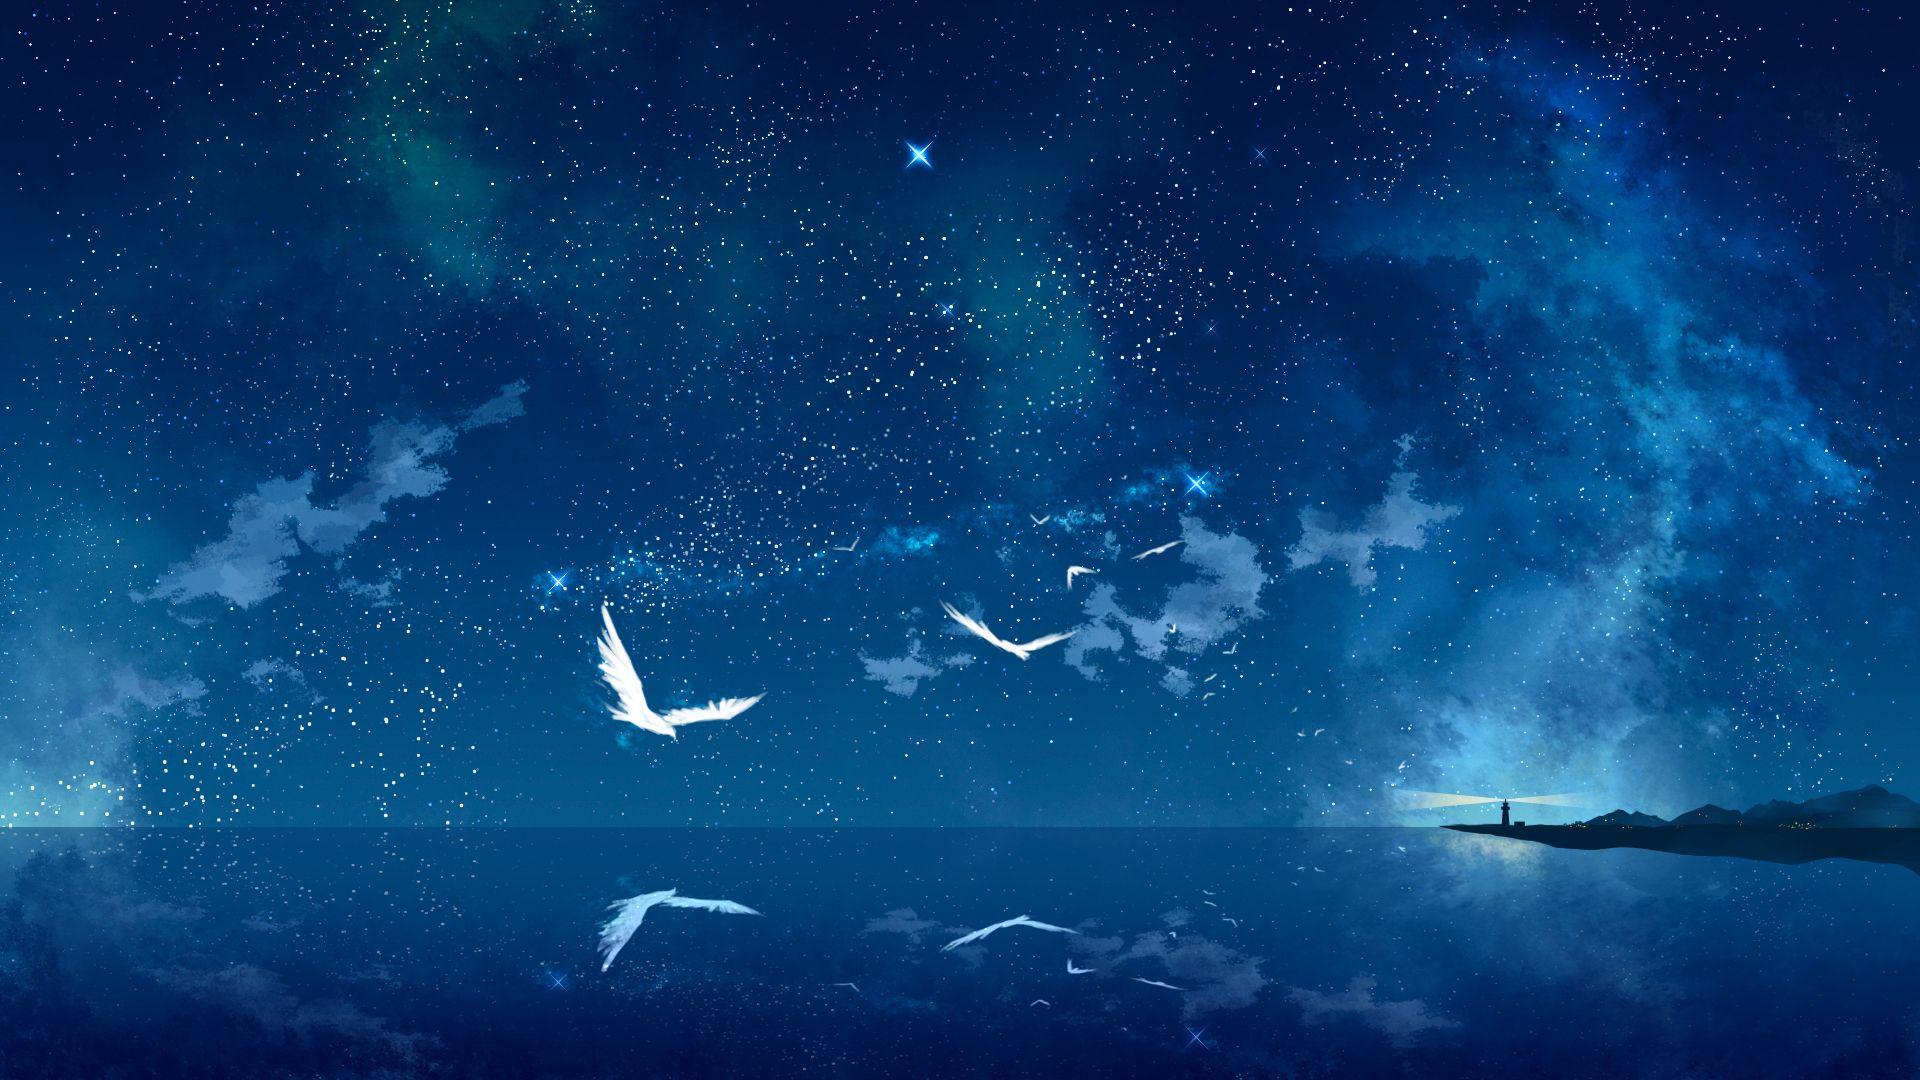 Night Sky Anime Wallpaper Stock Photo, Picture and Royalty Free Image.  Image 206808578.